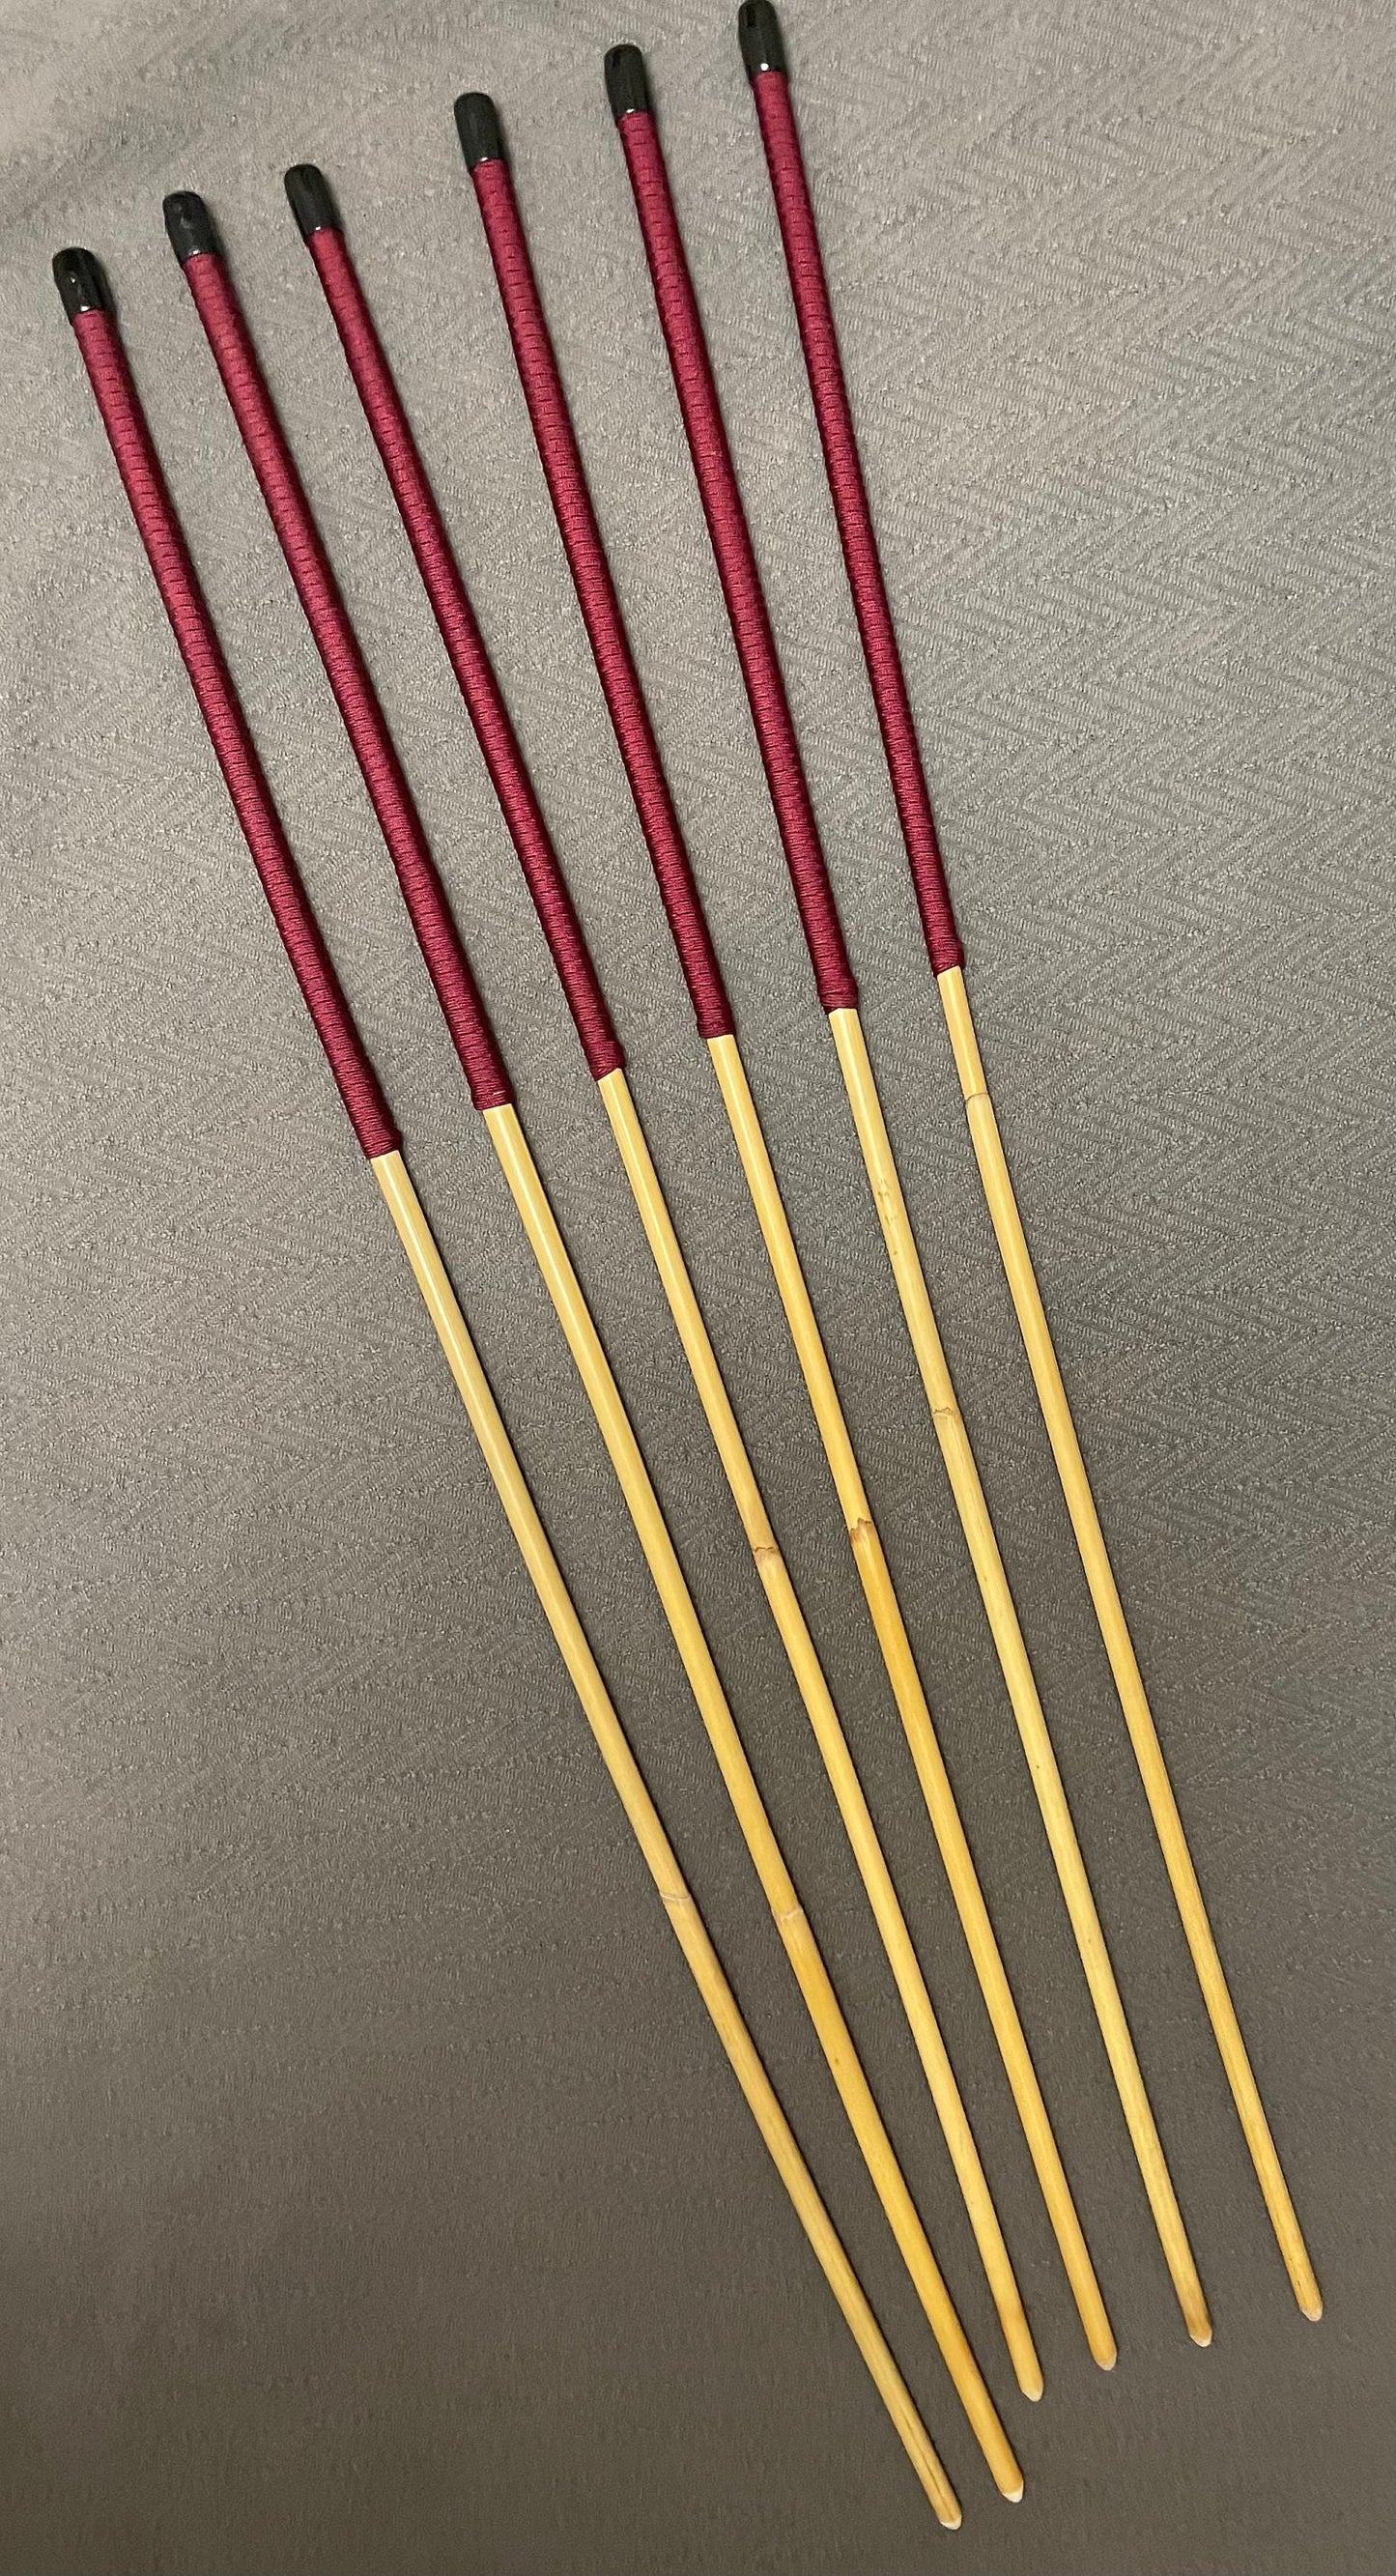 Thick and Thuddy Dragon Cane Set of 6 Rattan Canes  - 95 to 100 cms Length - Burgundy Paracord Handlles